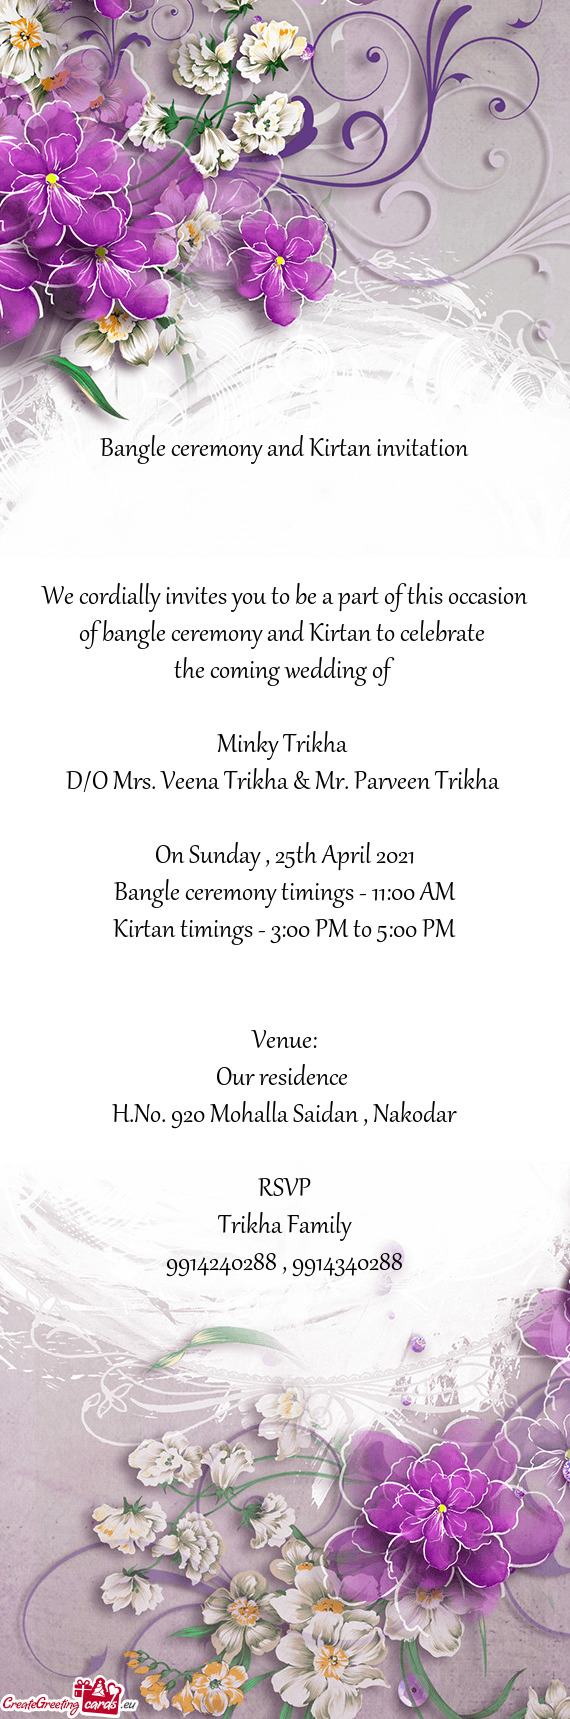 We cordially invites you to be a part of this occasion of bangle ceremony and Kirtan to celebrate